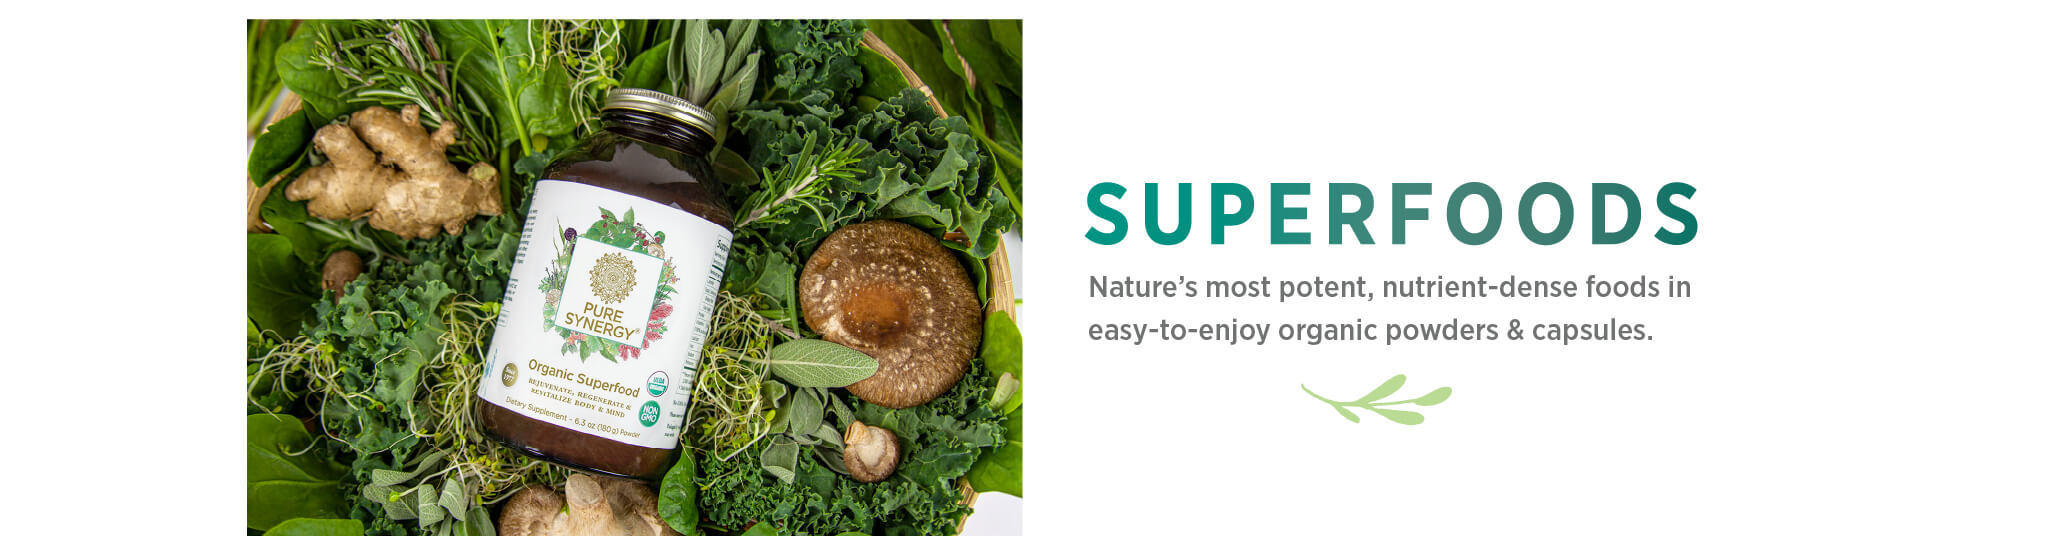 Superfoods: Nature's most potent, nutrient-dense foods in easy-toenjoy organic powders & capsules.